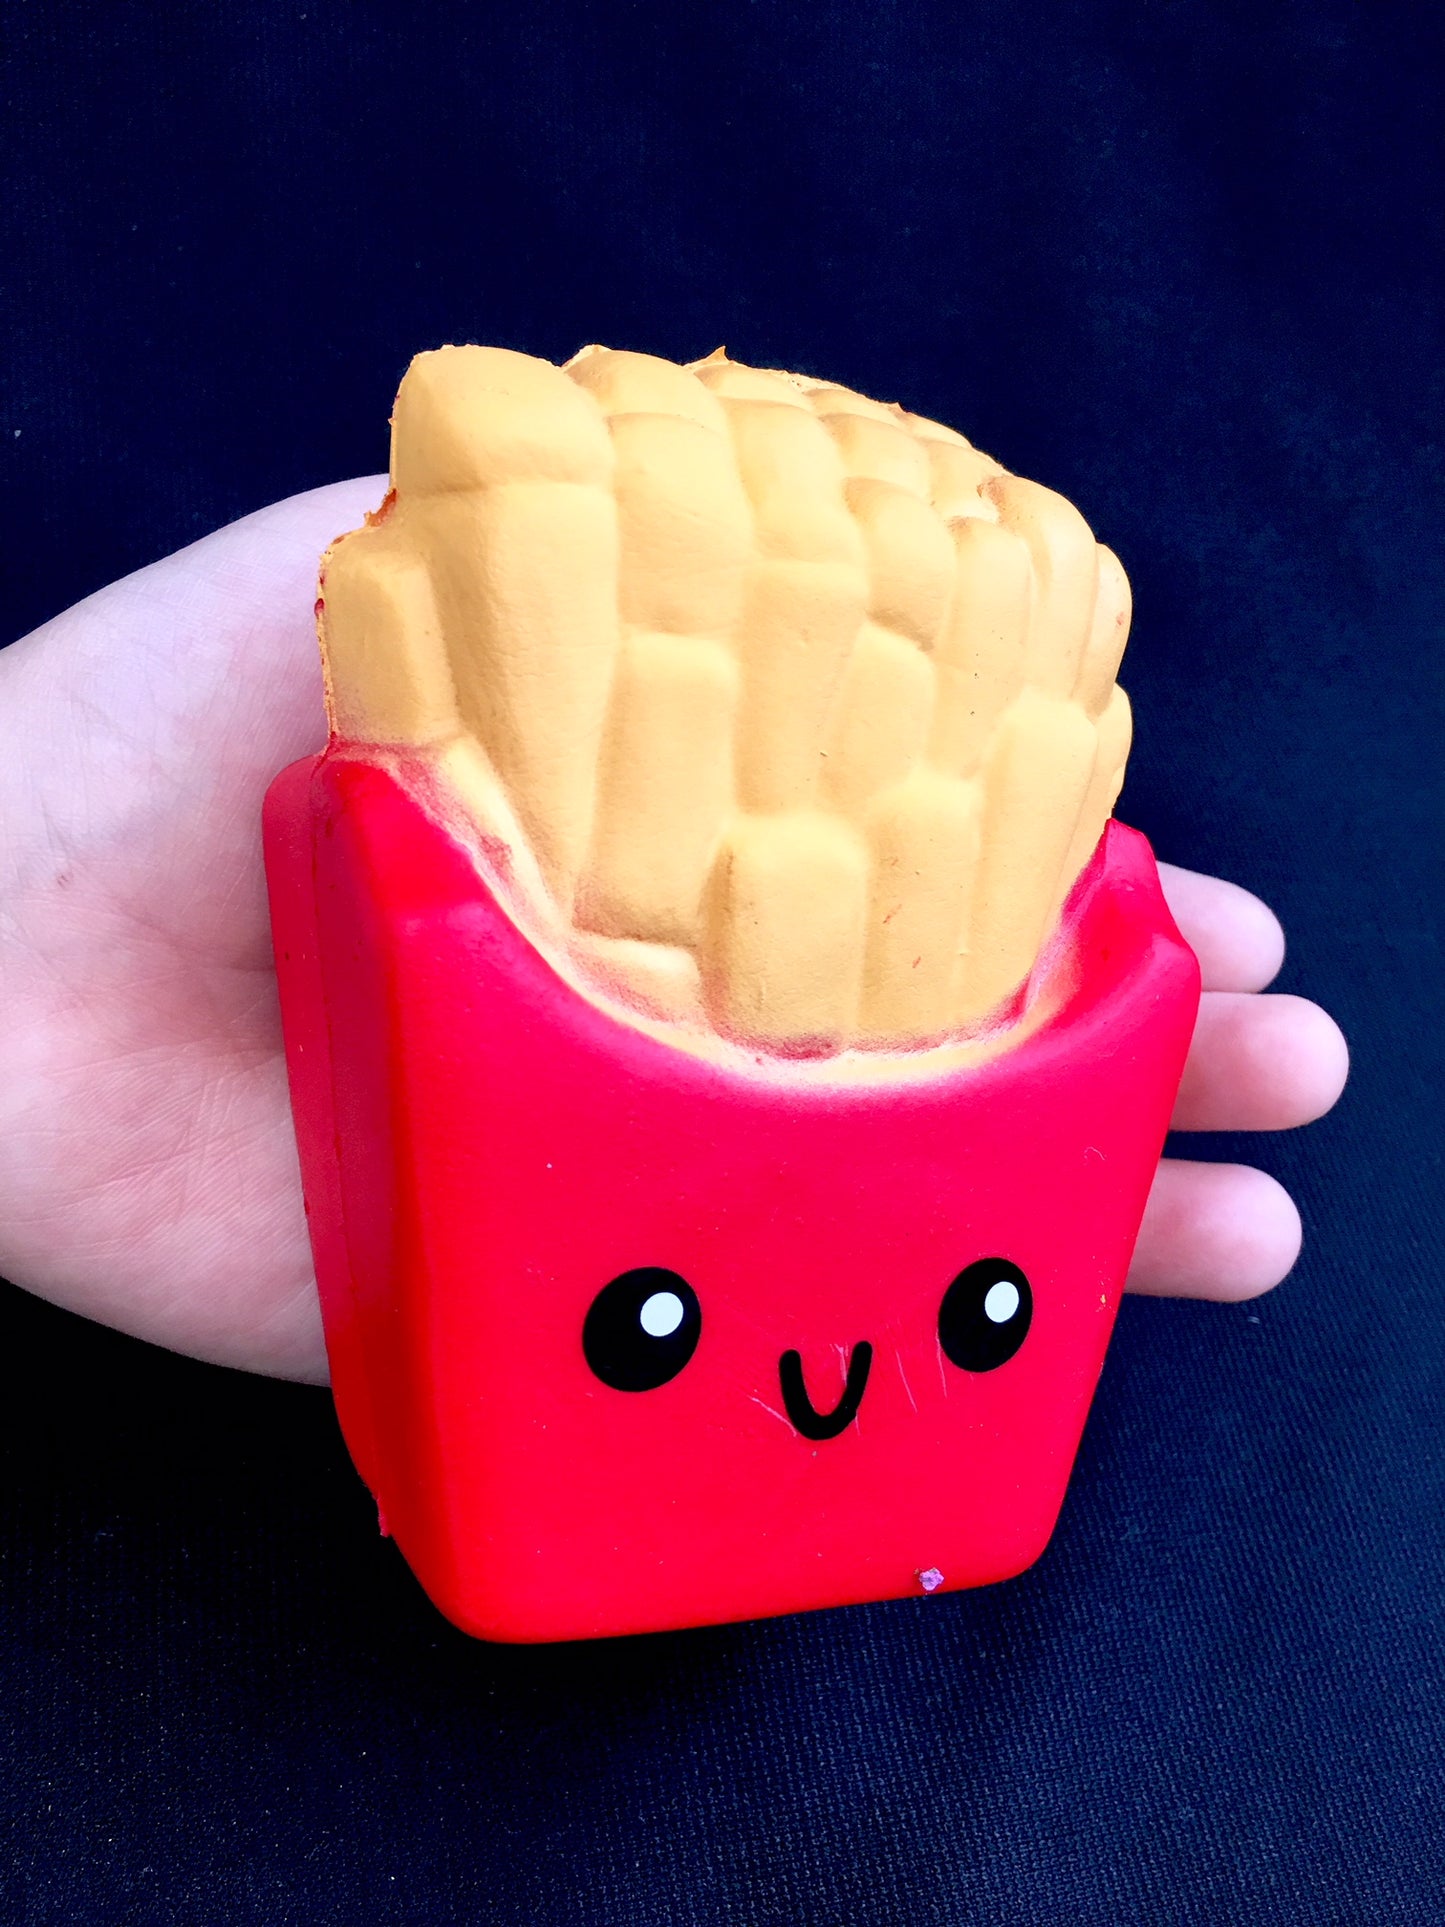 X 83232 FRENCH FRY SQUISHY-DISCONTINUED